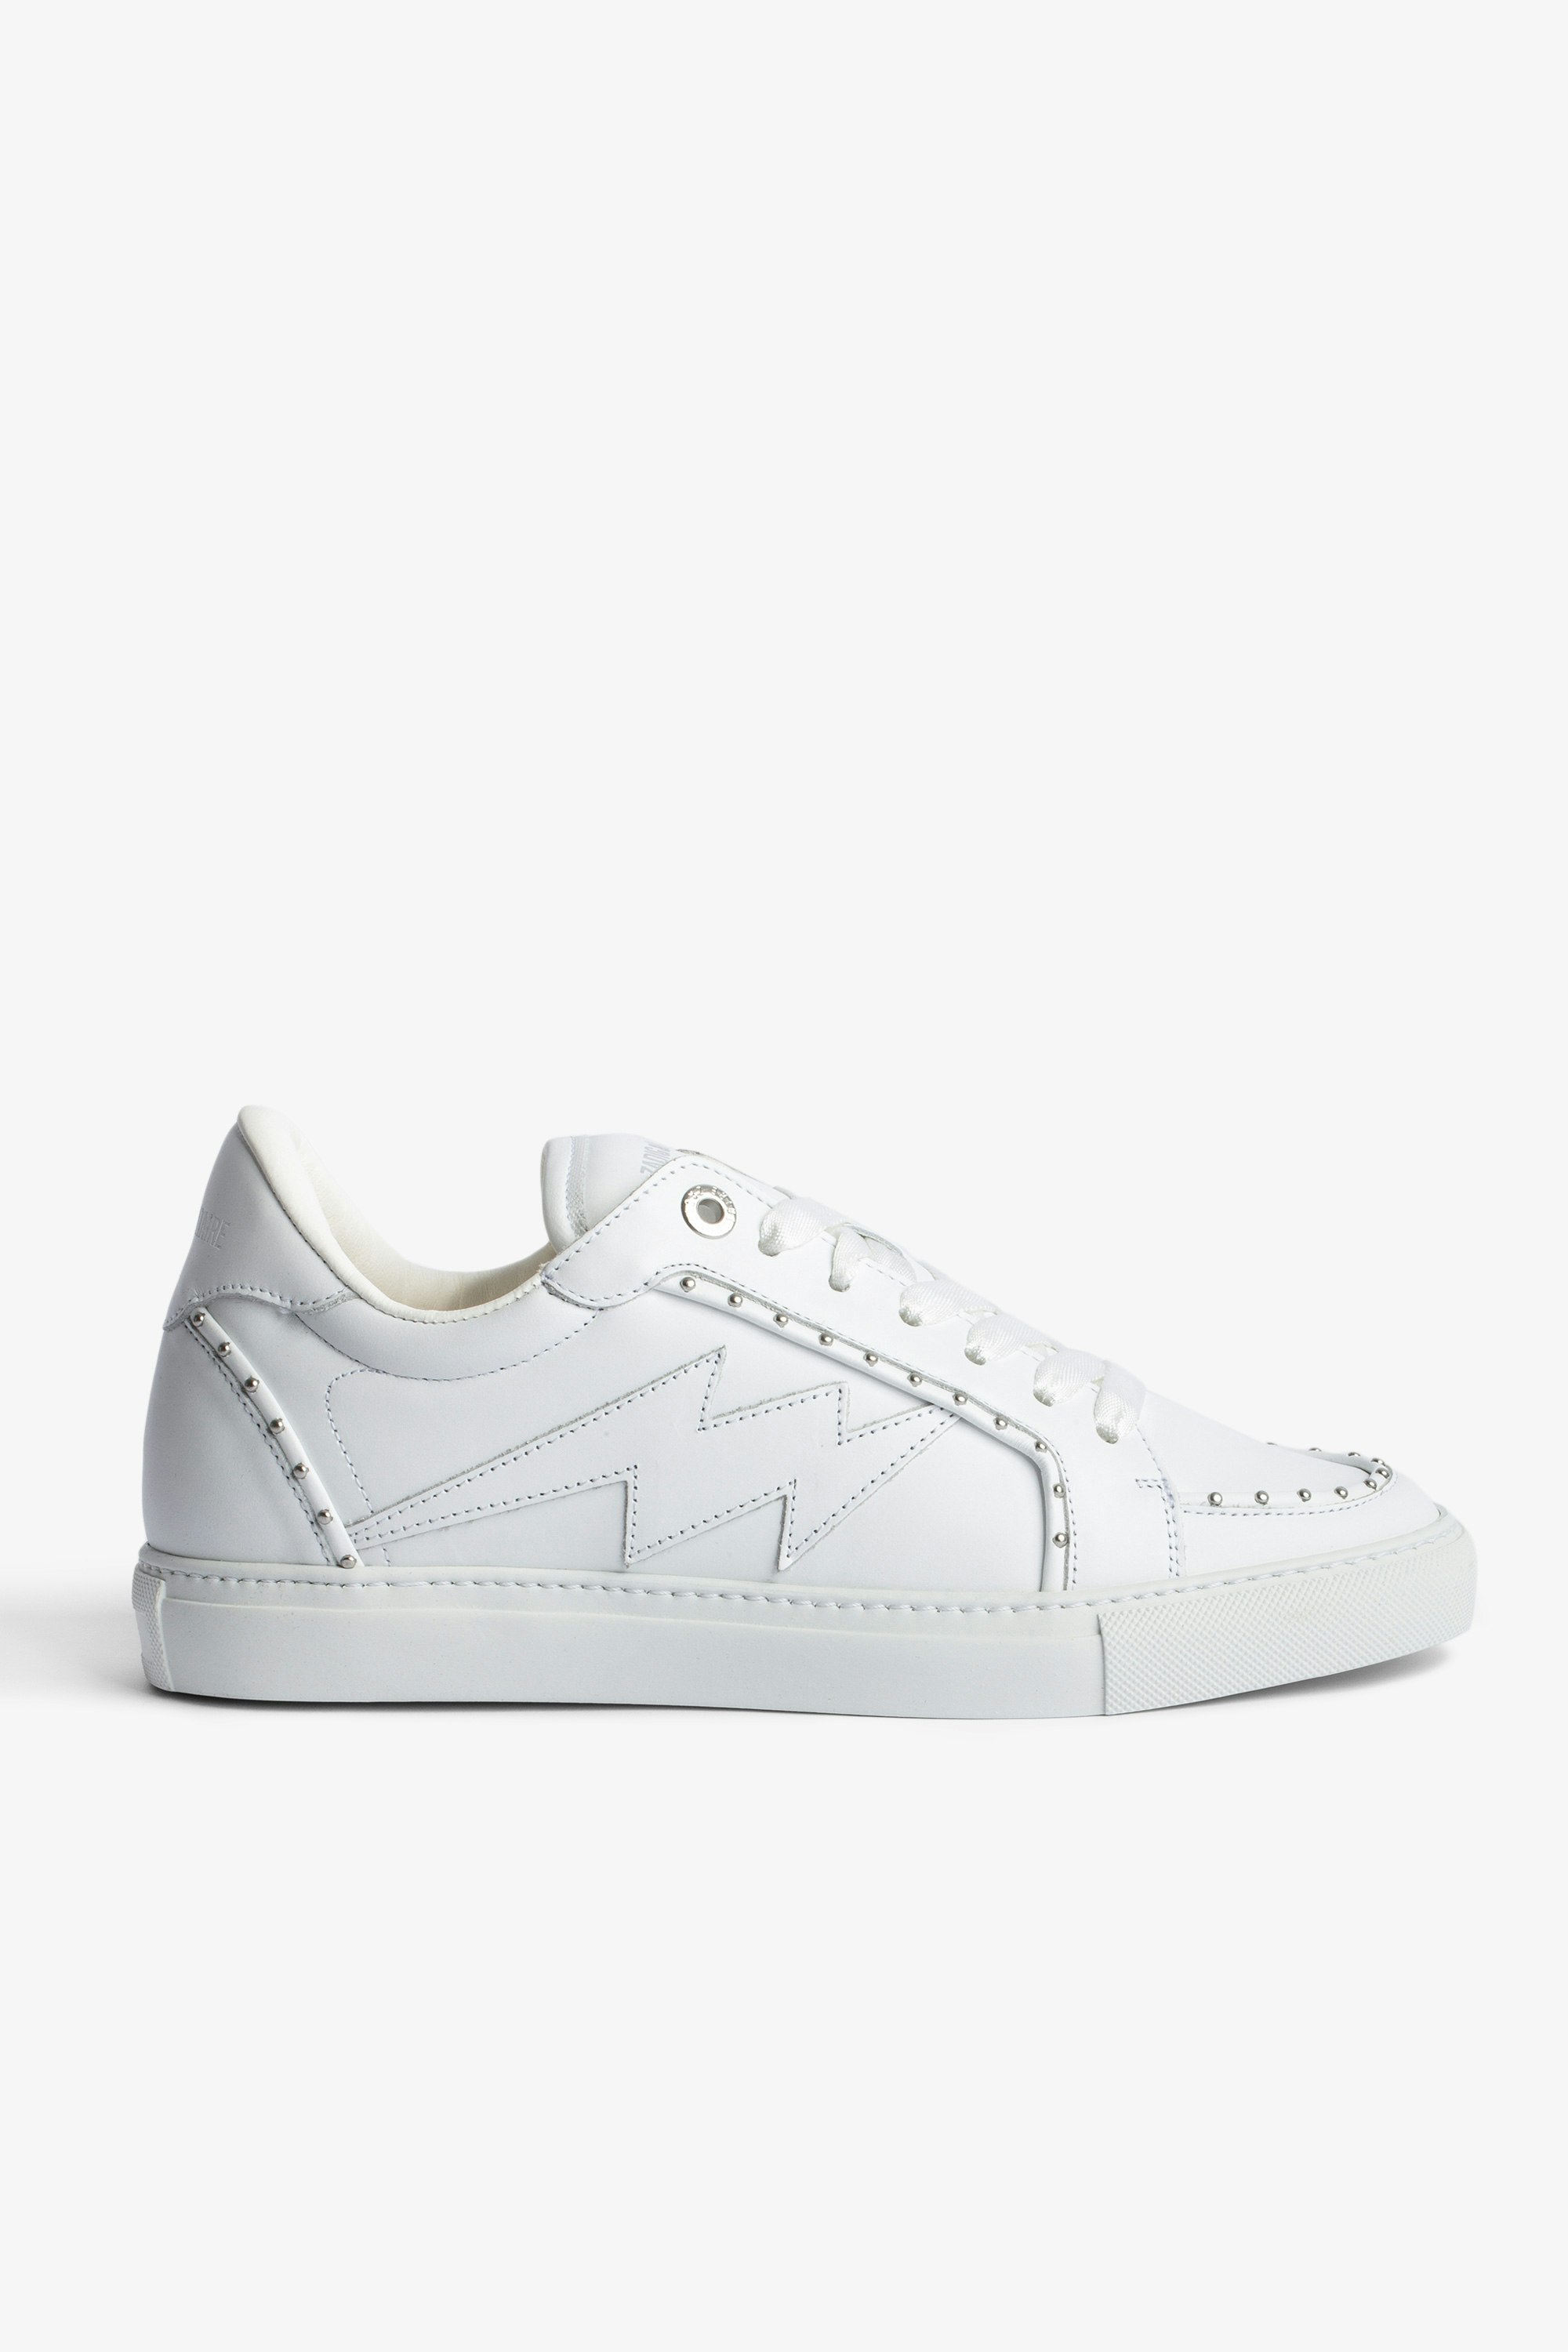 ZV1747 Studded Sneakers - Women's low-top sneakers in smooth white leather with silver-tone studs